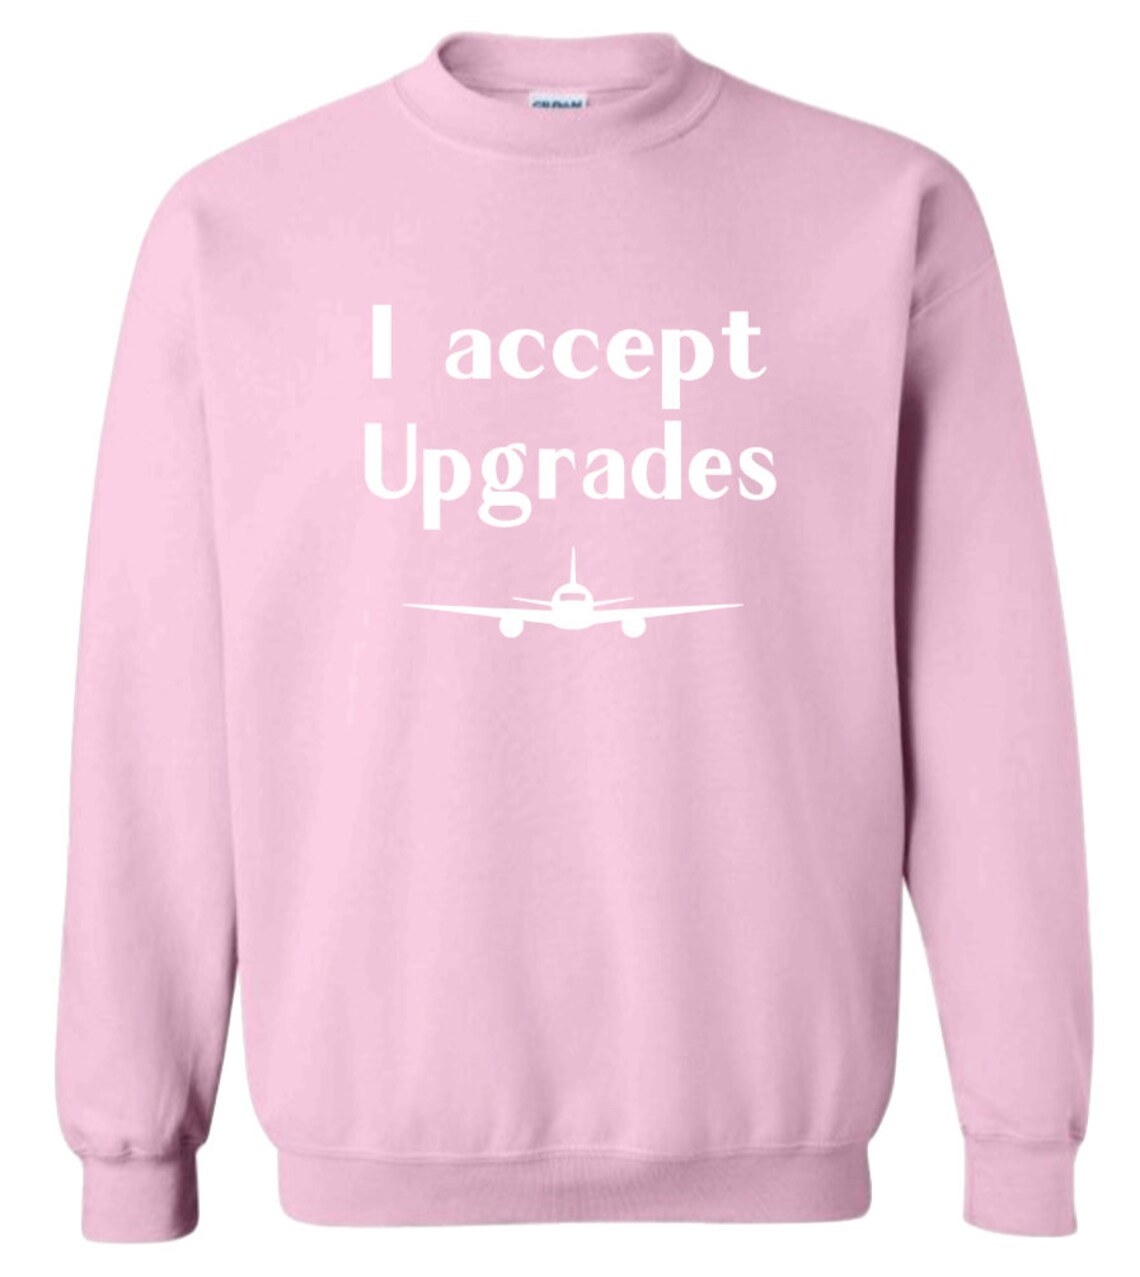 The sweatshirt in pink that reads, &quot;I accept upgrades&quot;